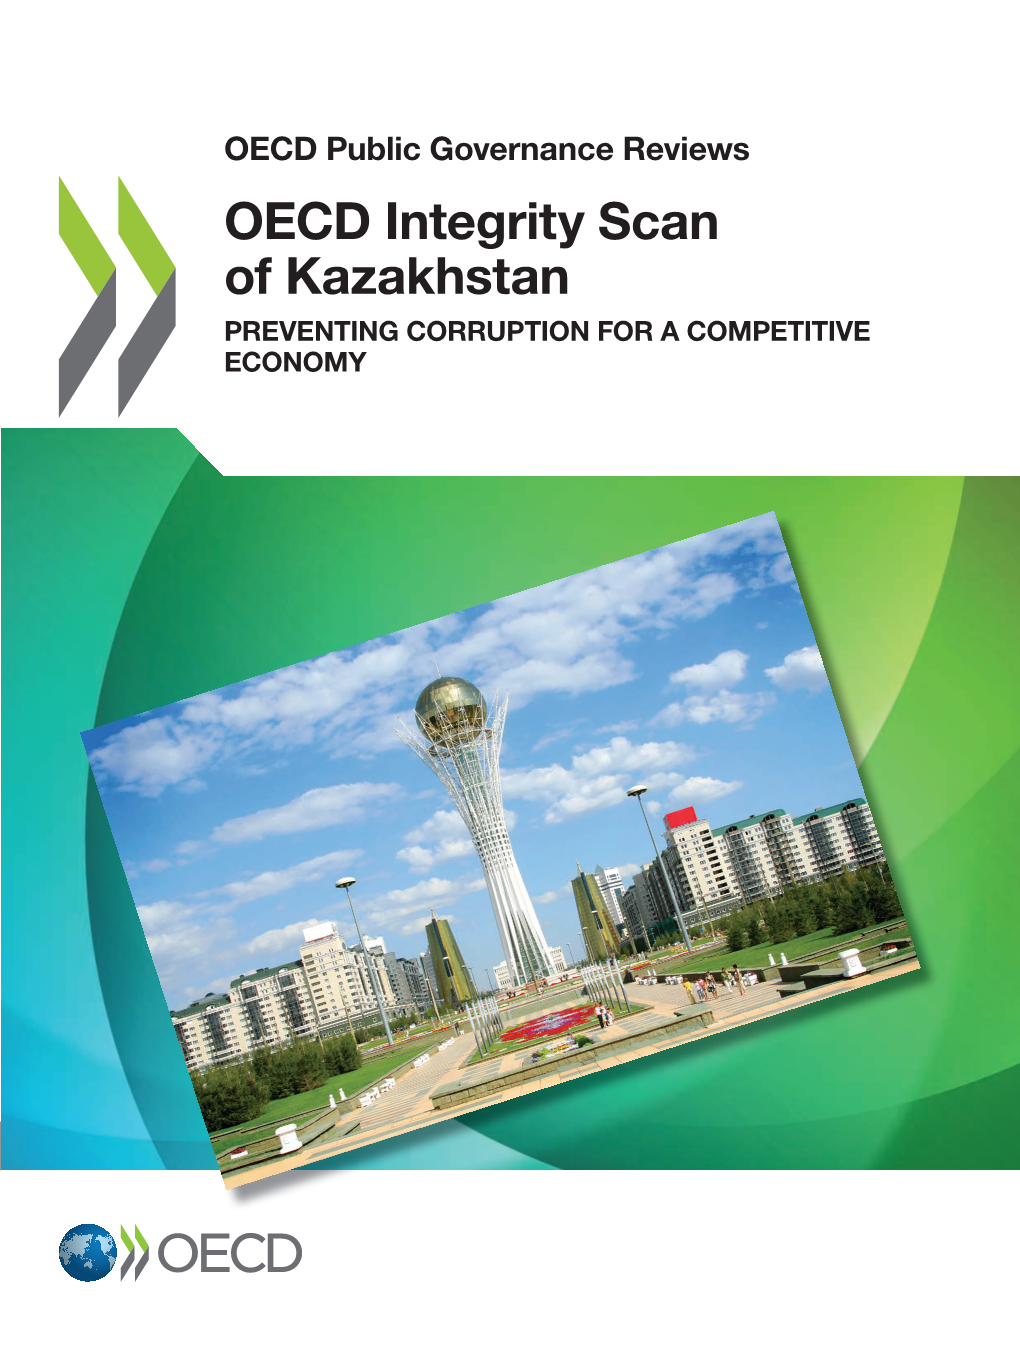 OECD Integrity Scan of Kazakhstan OECD Public Governance Reviews PREVENTING CORRUPTION for a COMPETITIVE ECONOMY